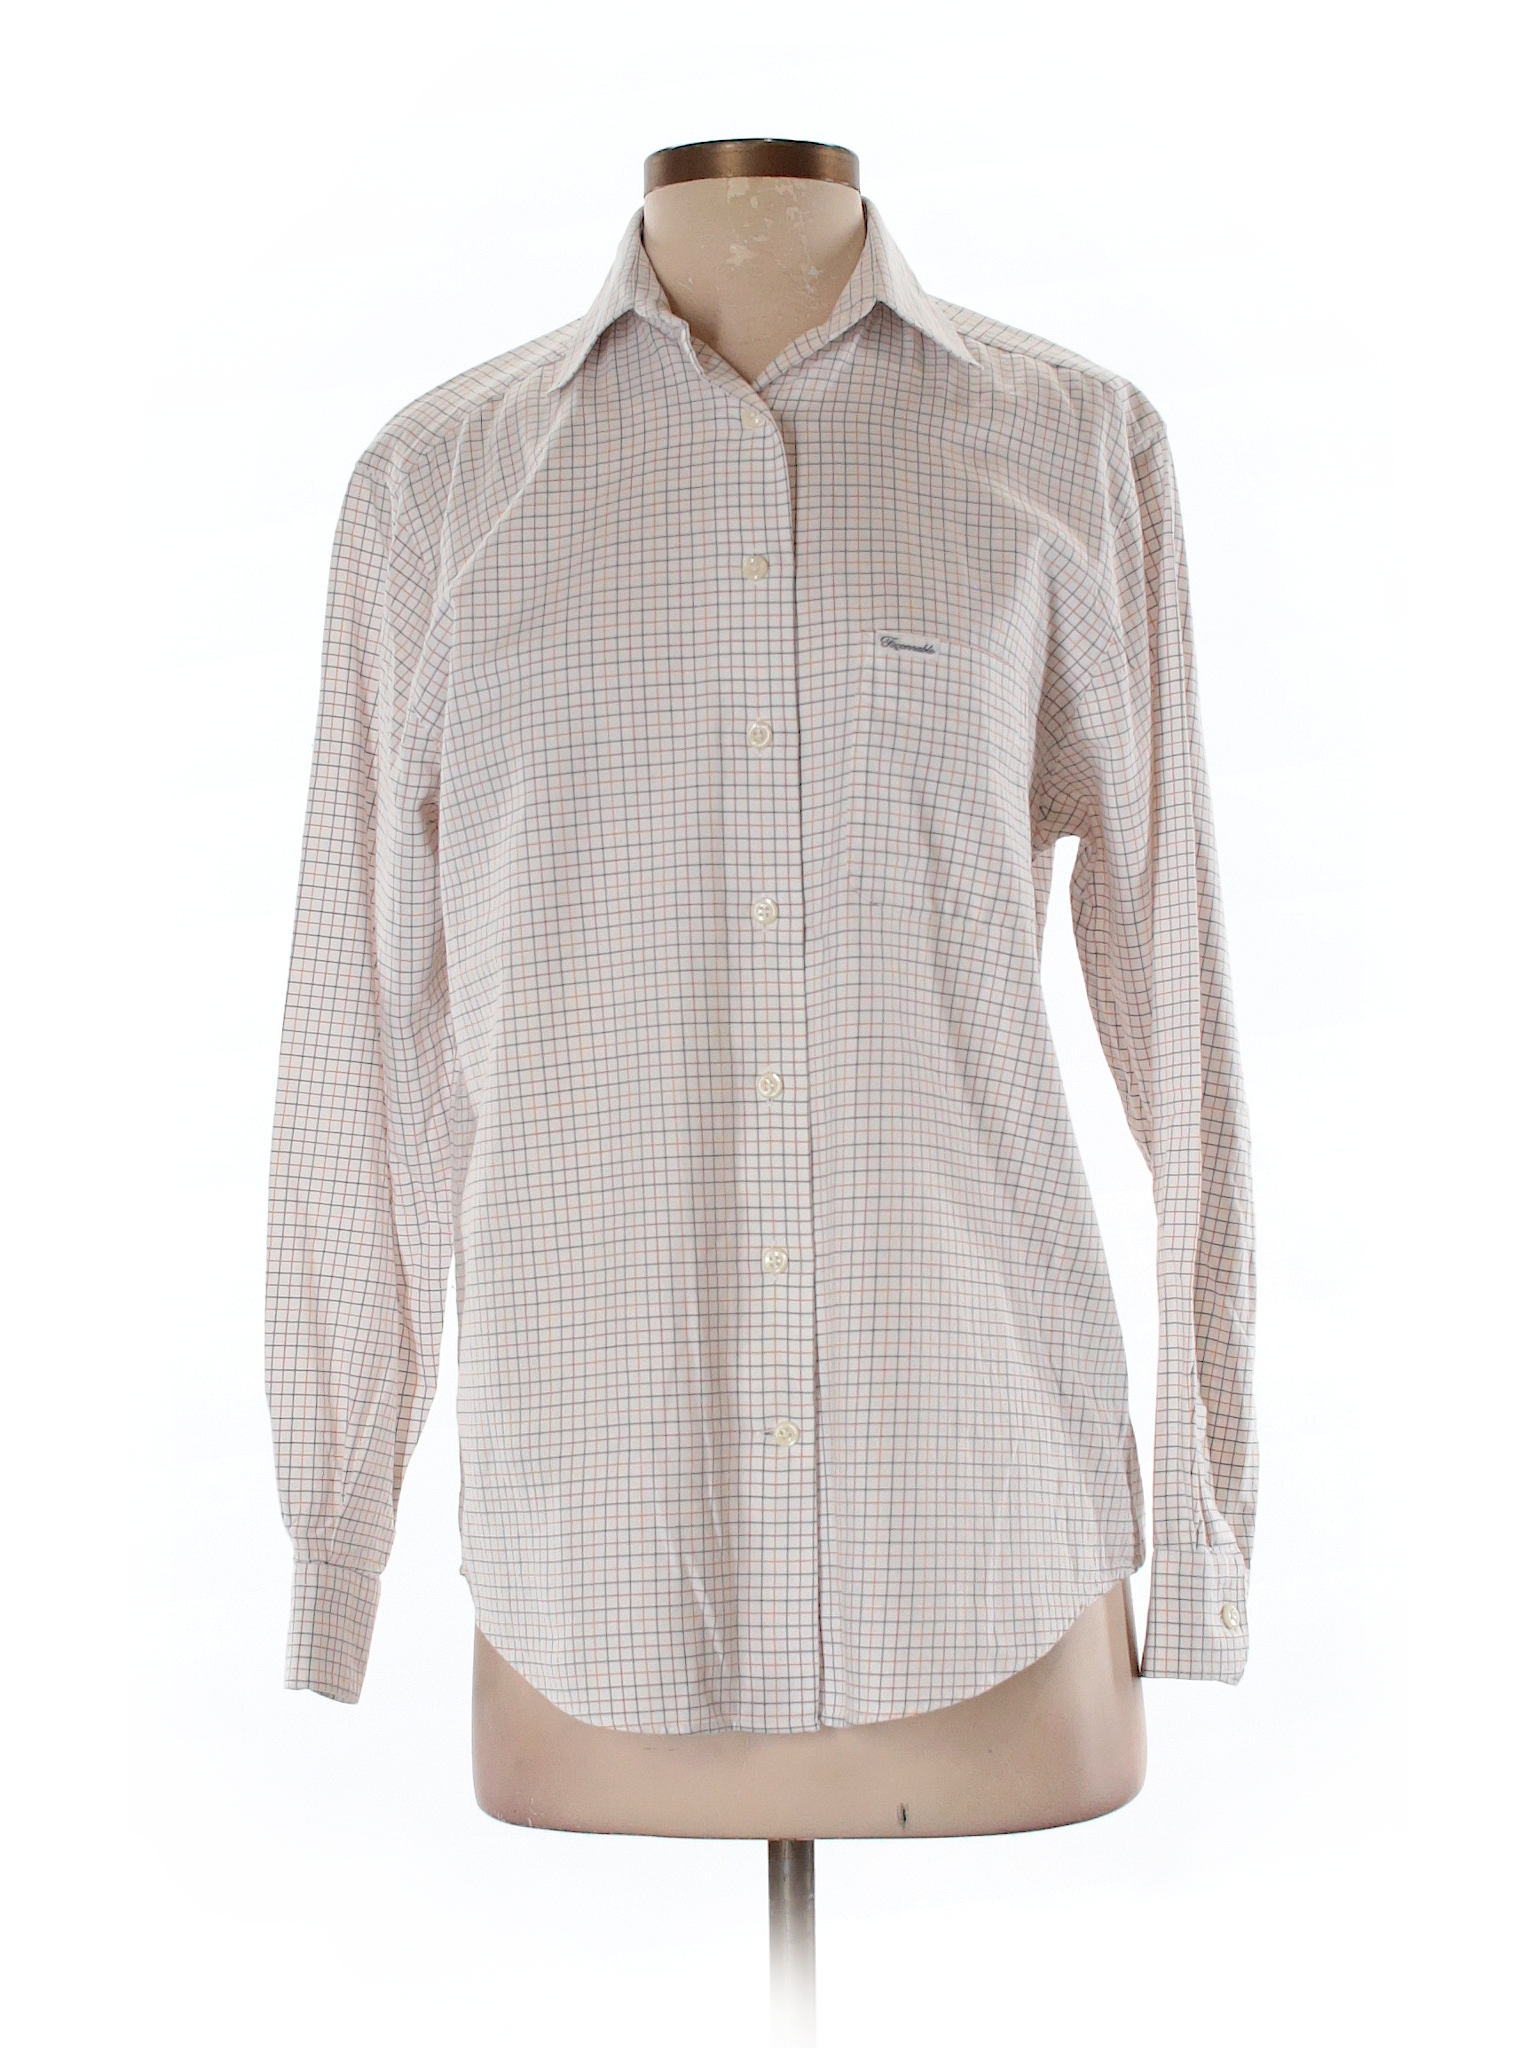 Faconnable 100% Cotton Plaid Ivory Long Sleeve Button-Down Shirt Size S ...